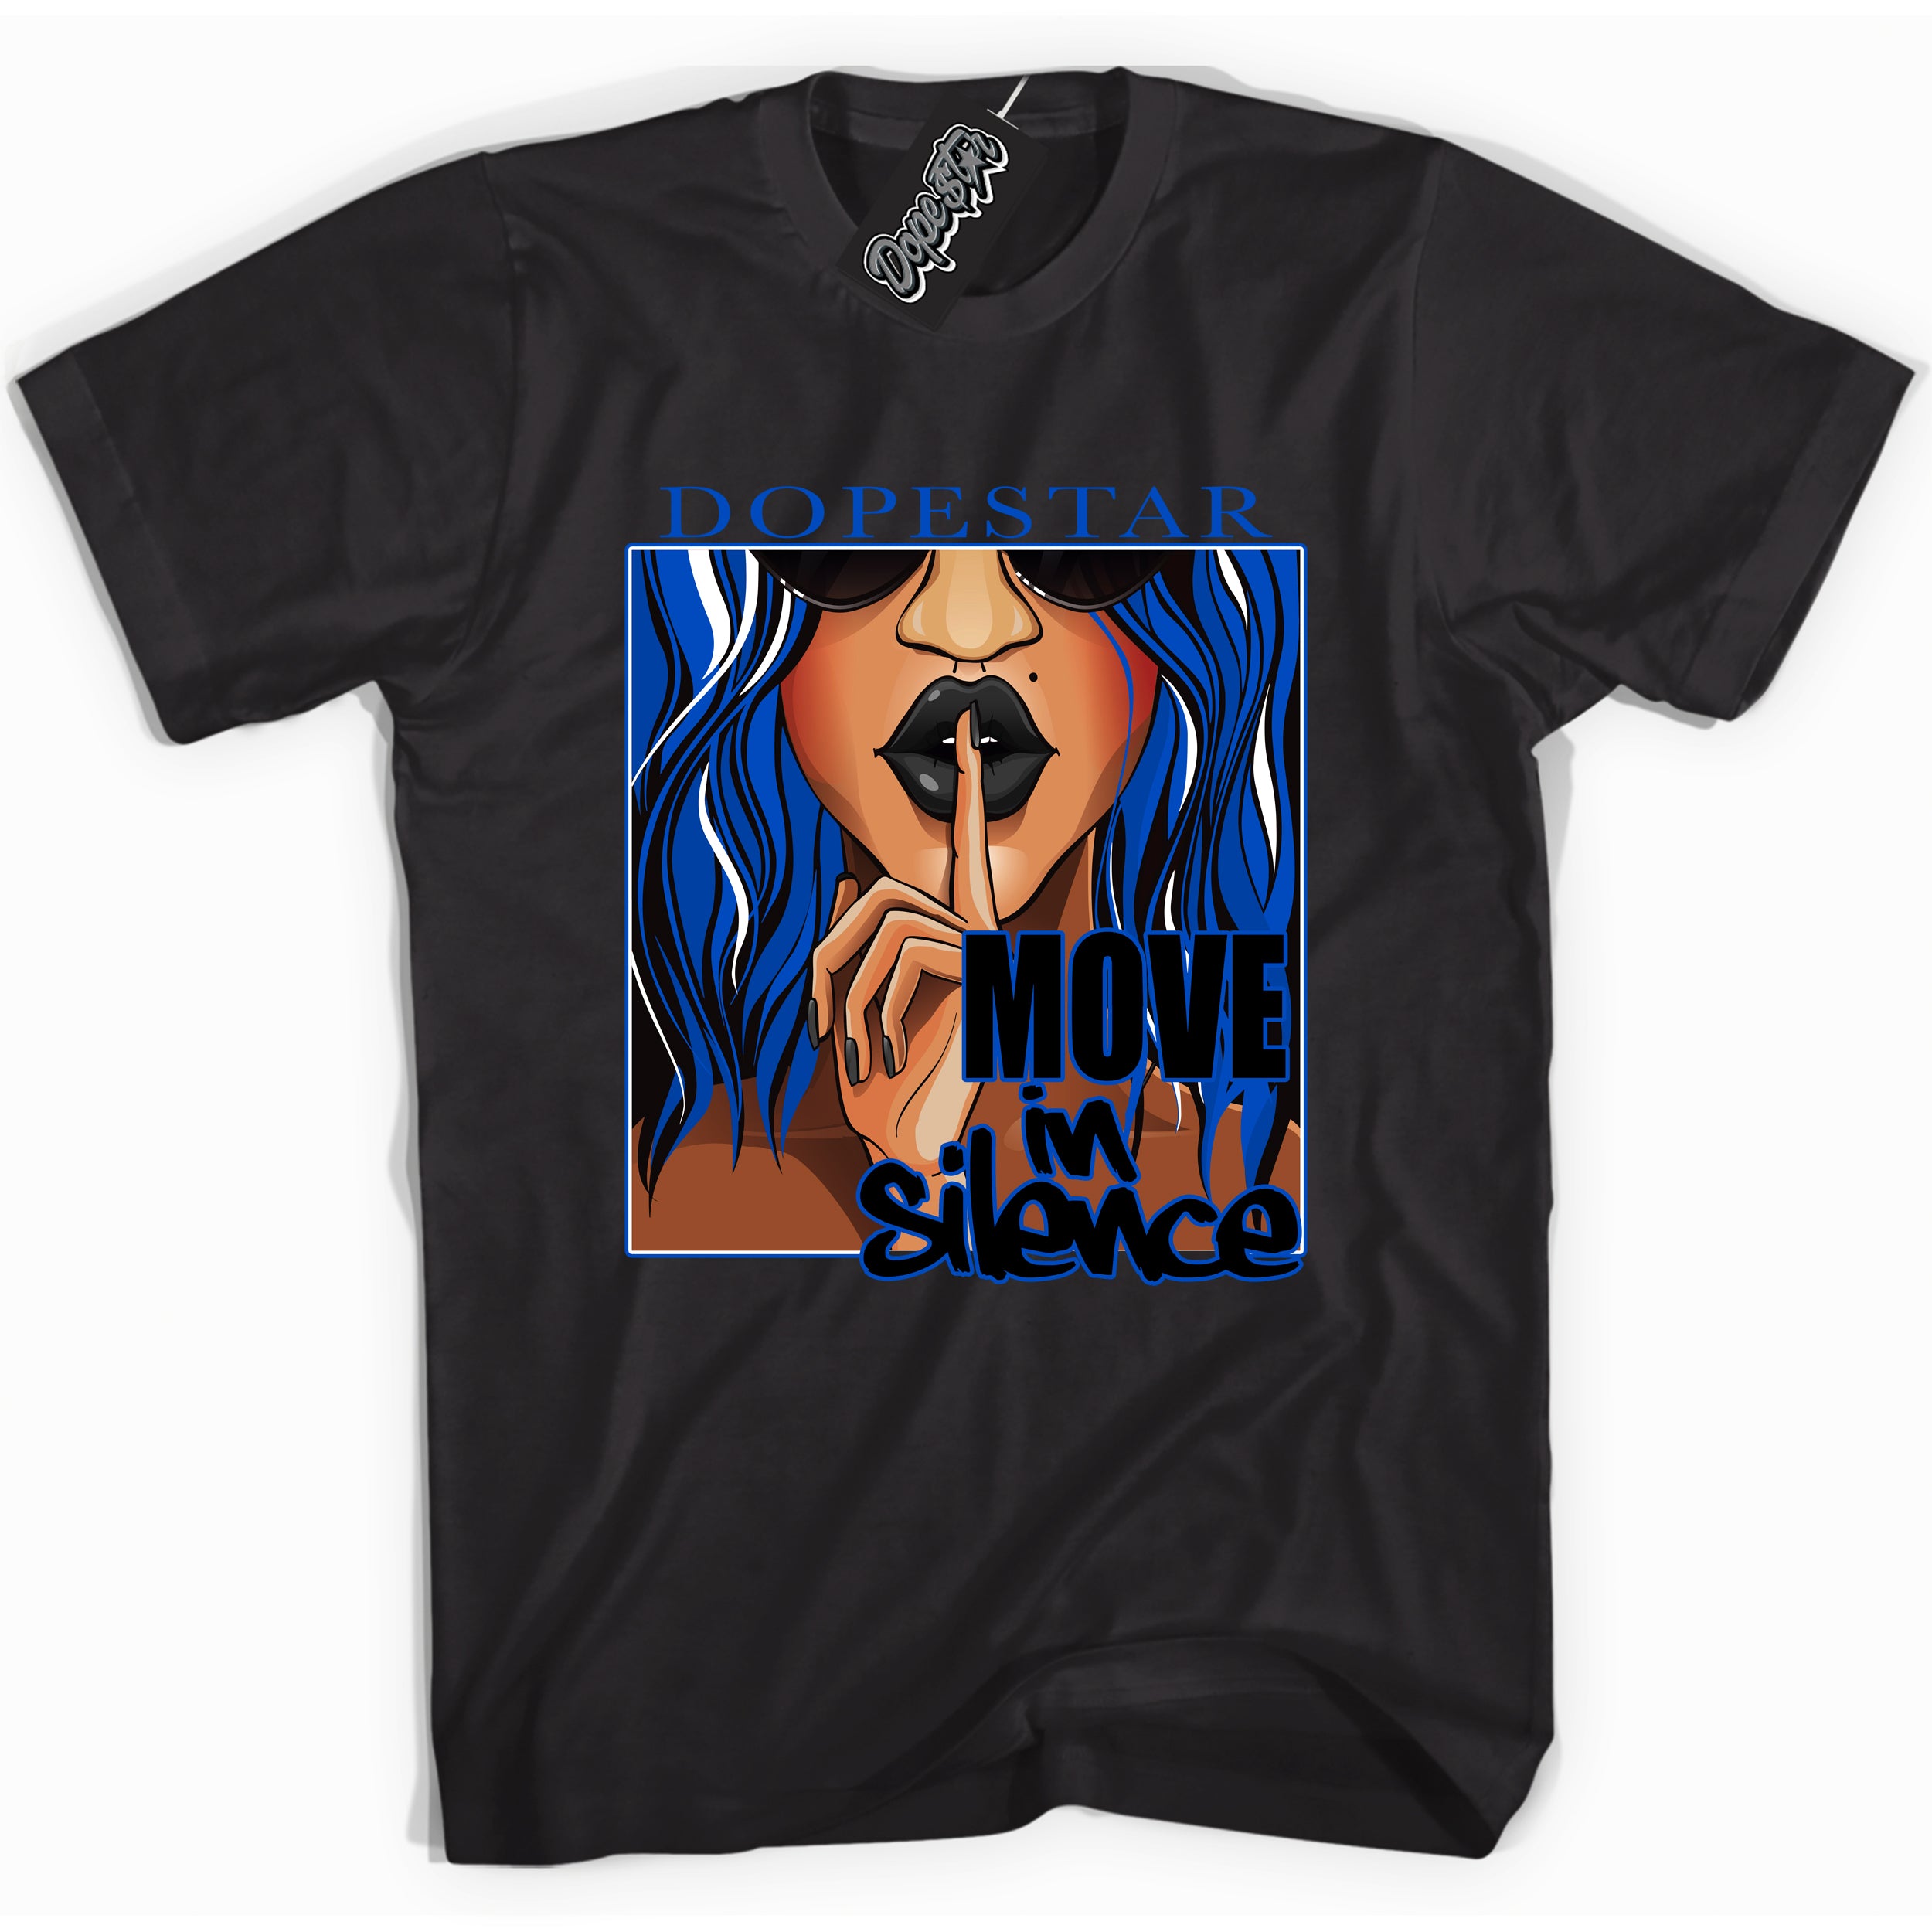 Cool Black graphic tee with Move In Silence print, that perfectly matches OG Royal Reimagined 1s sneakers 